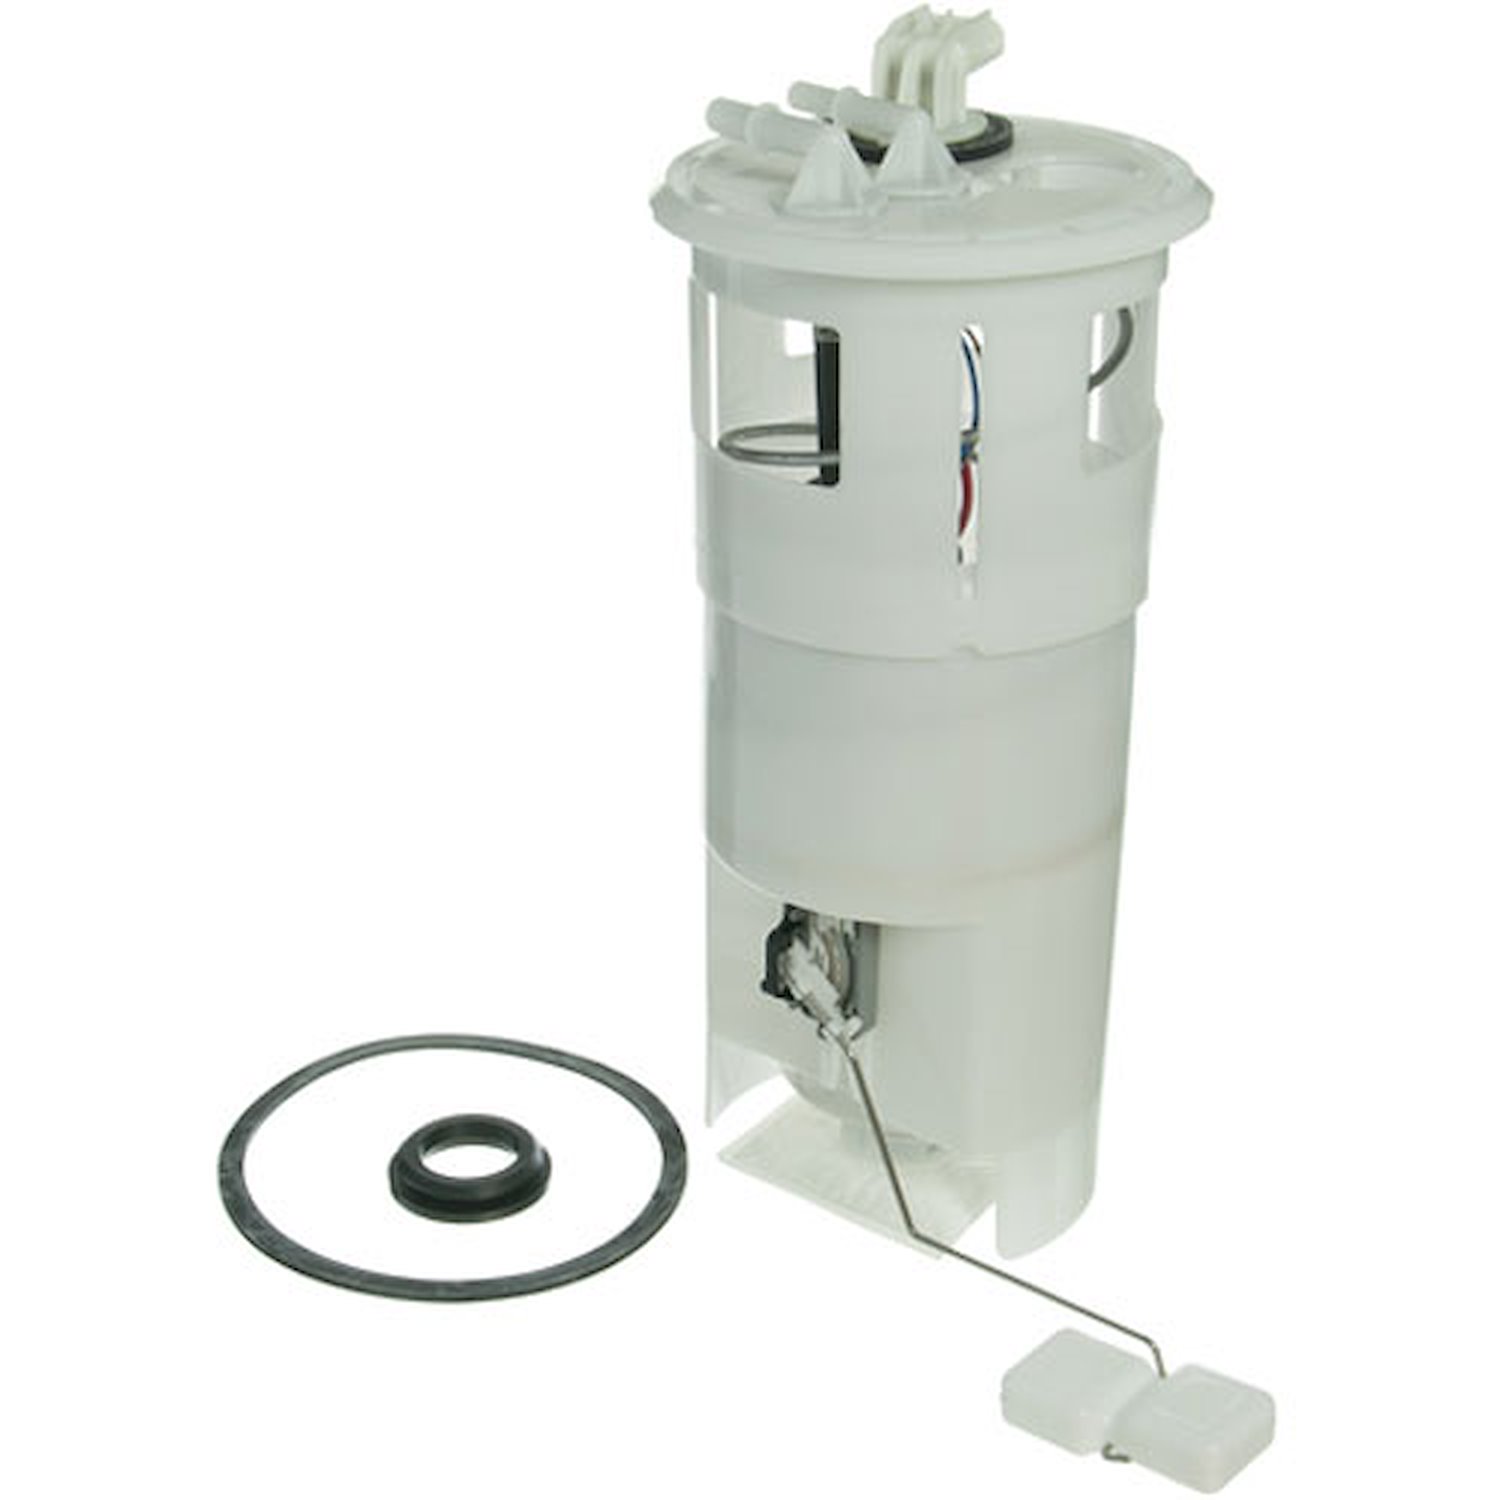 OE Chrysler/Dodge Replacement Electric Fuel Pump Module Assembly 1996-97 Chrysler Concorde/LHS/New Yorker 3.3L/3.5L V6